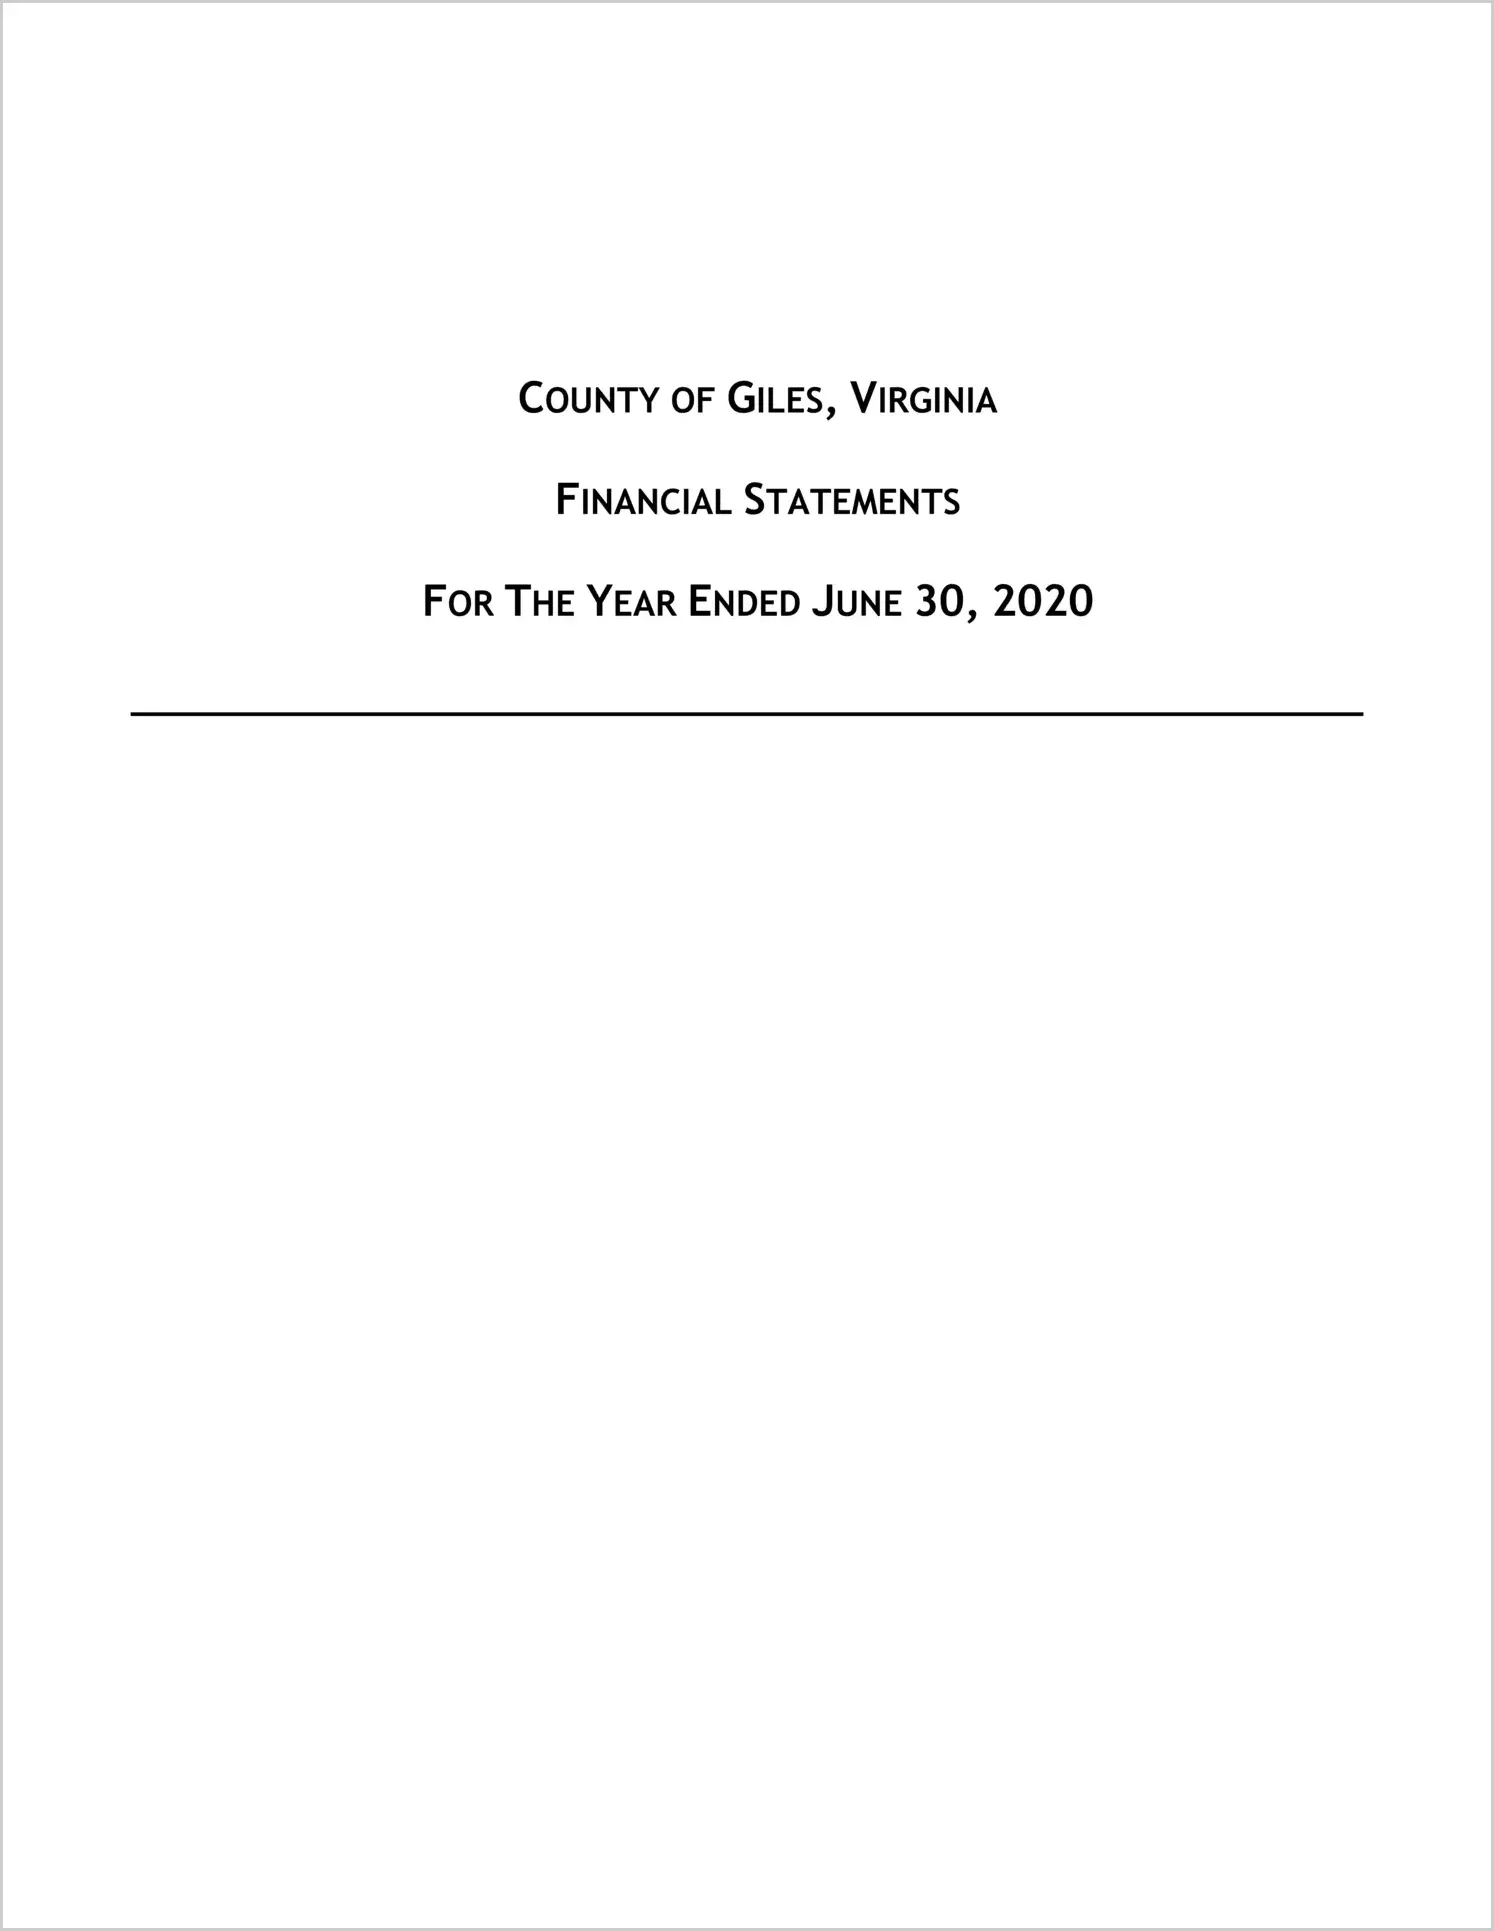 2020 Annual Financial Report for County of Giles